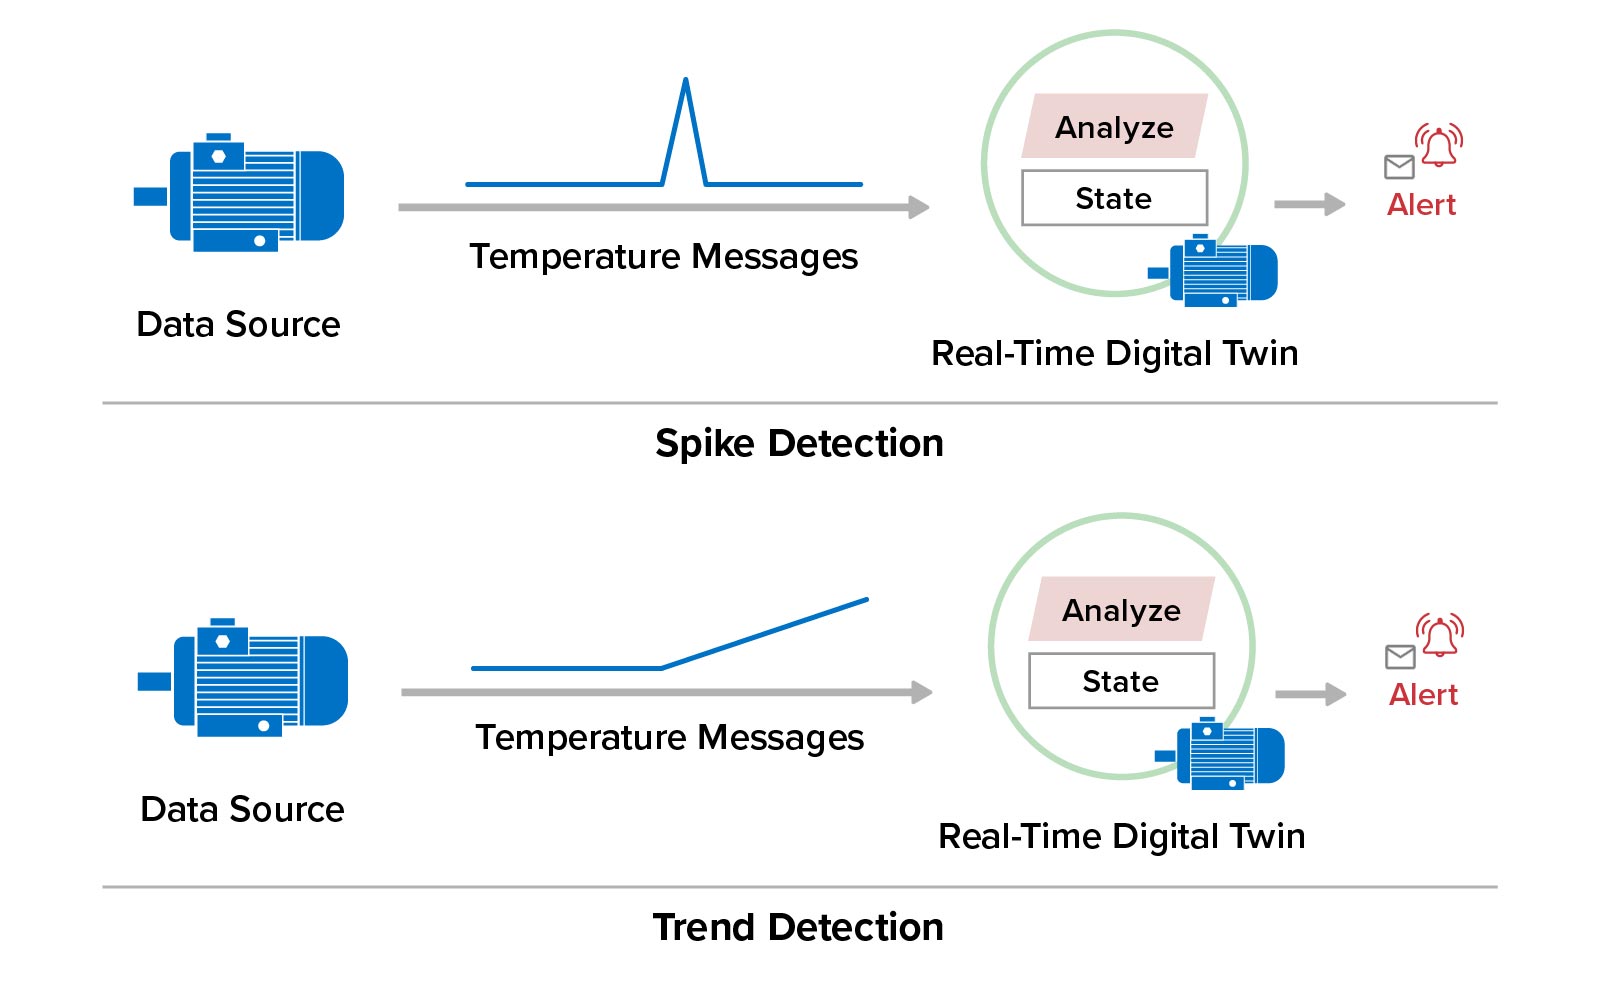 Real-time digital twins can perform spike and trend detection for telemetry parameters.